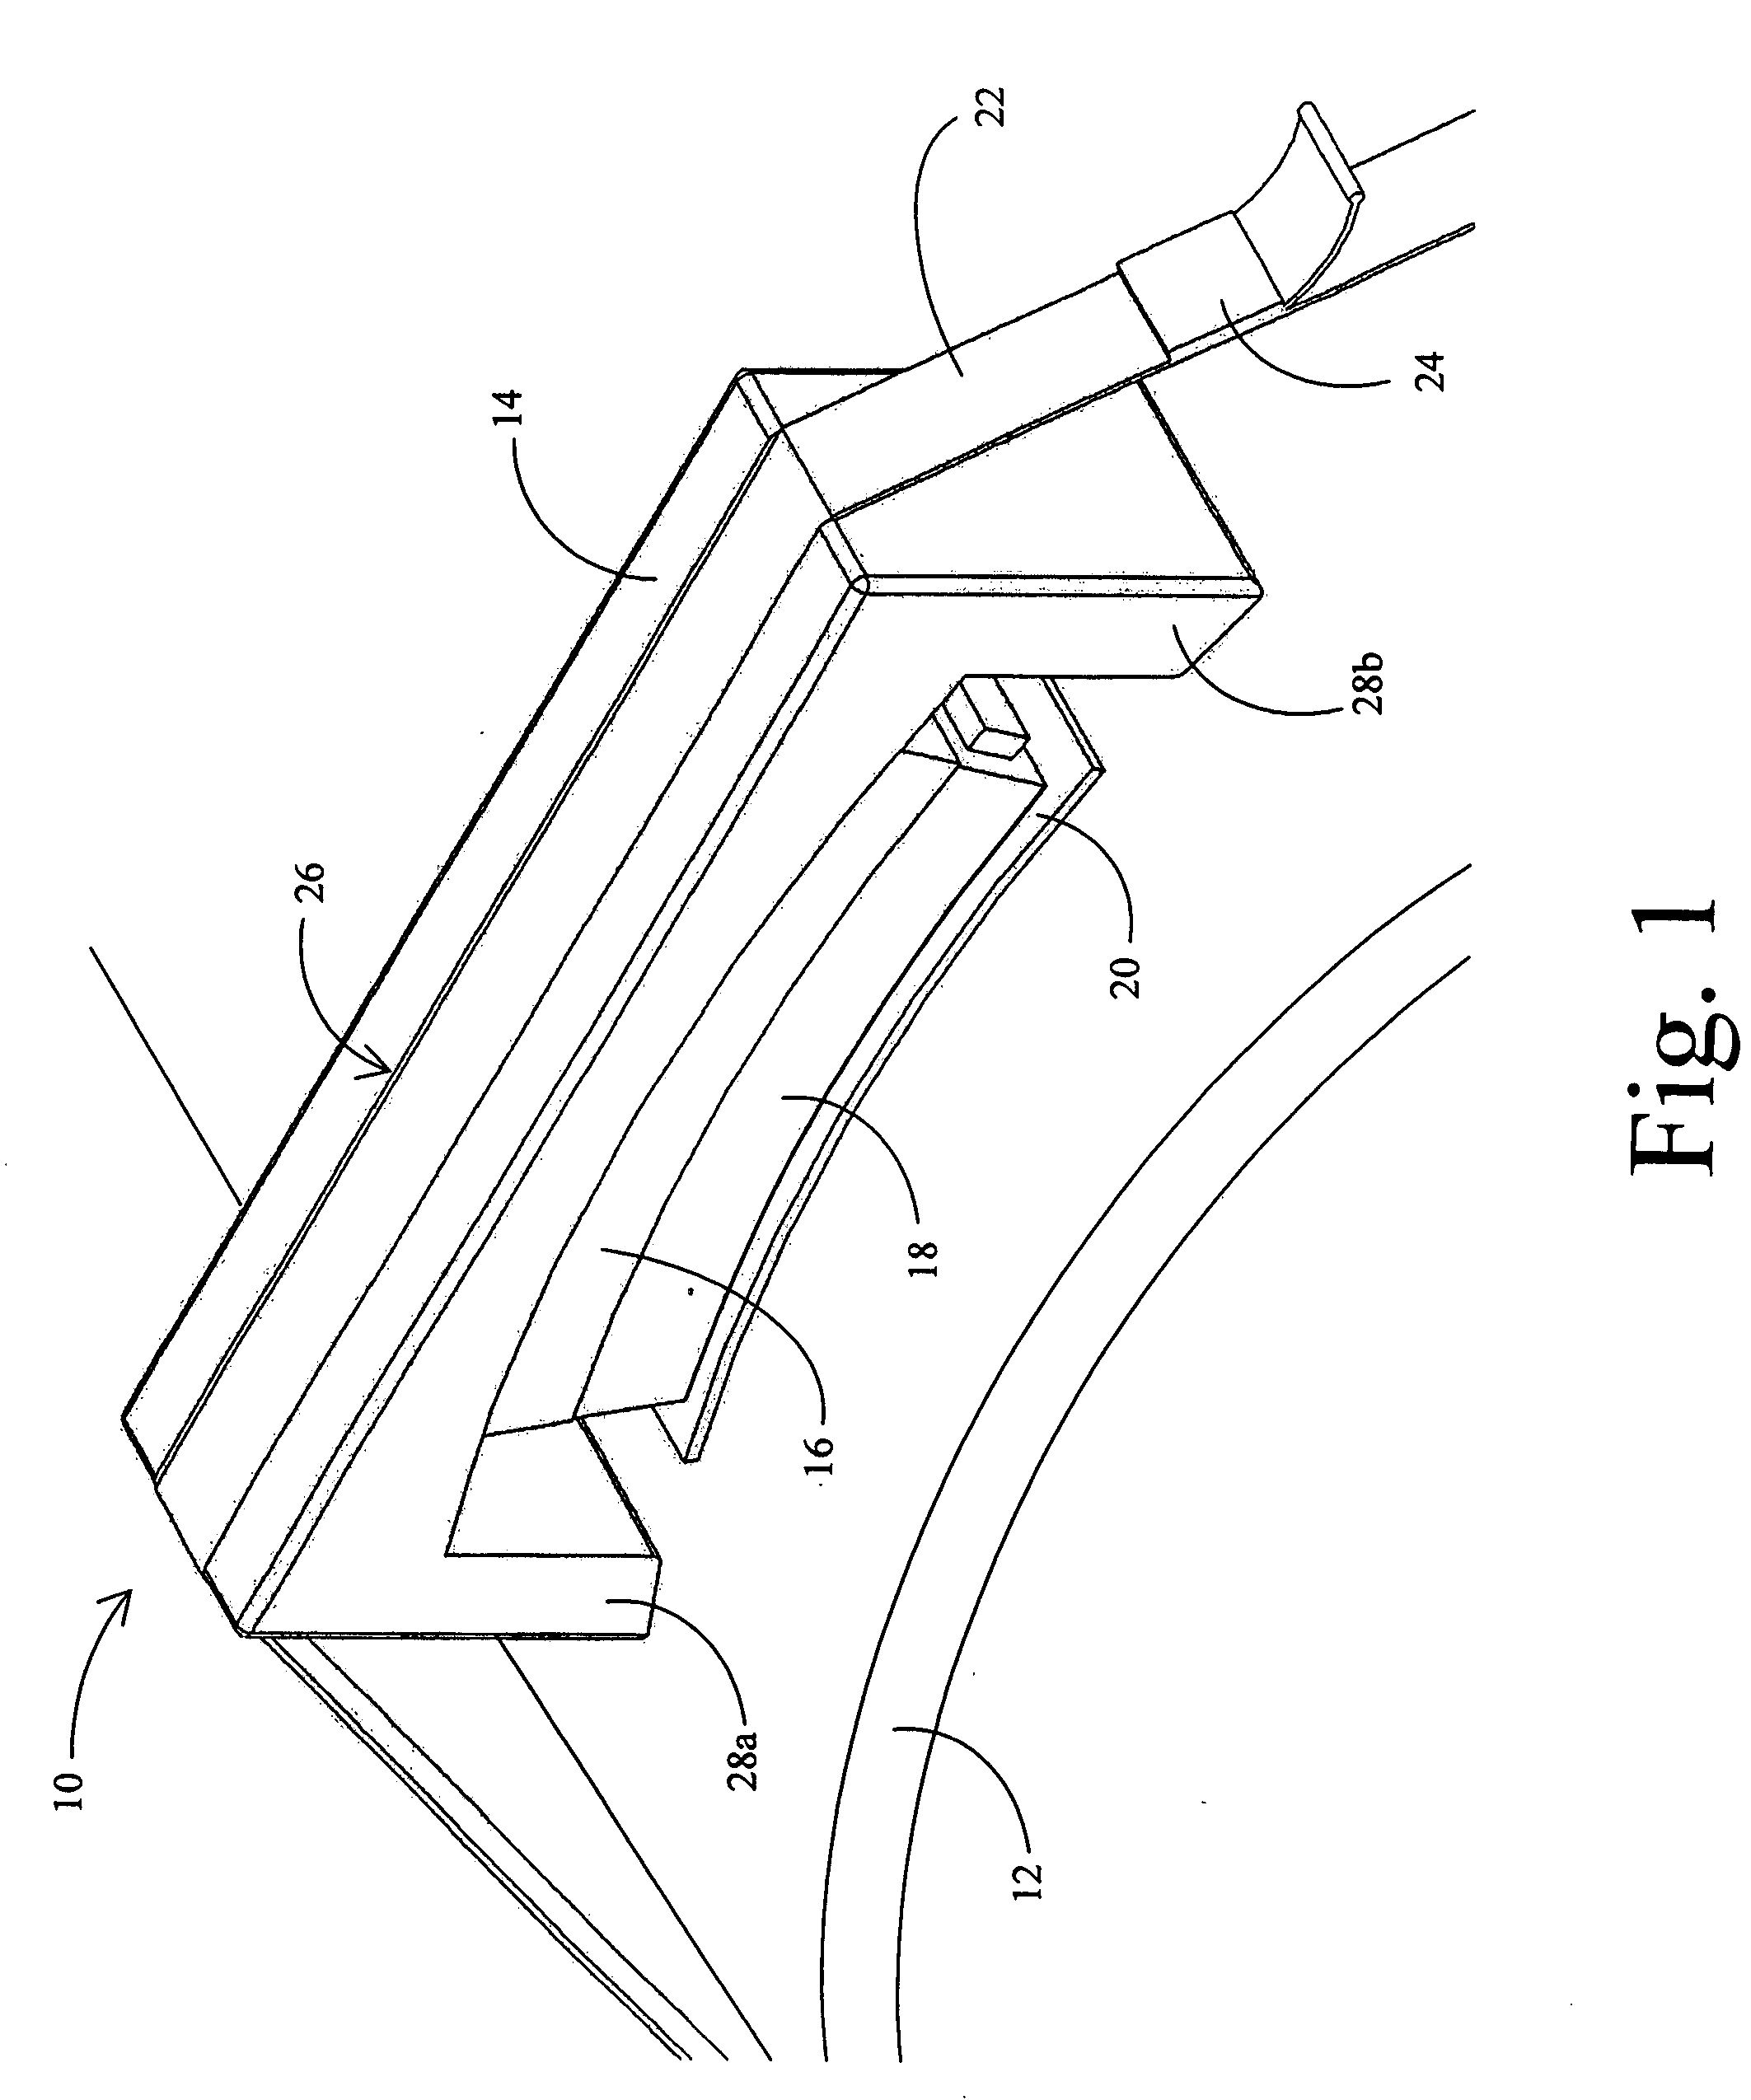 Method and device for long-range torsional guided-wave inspection of piping with a partial excitation and detection around the pipe circumference